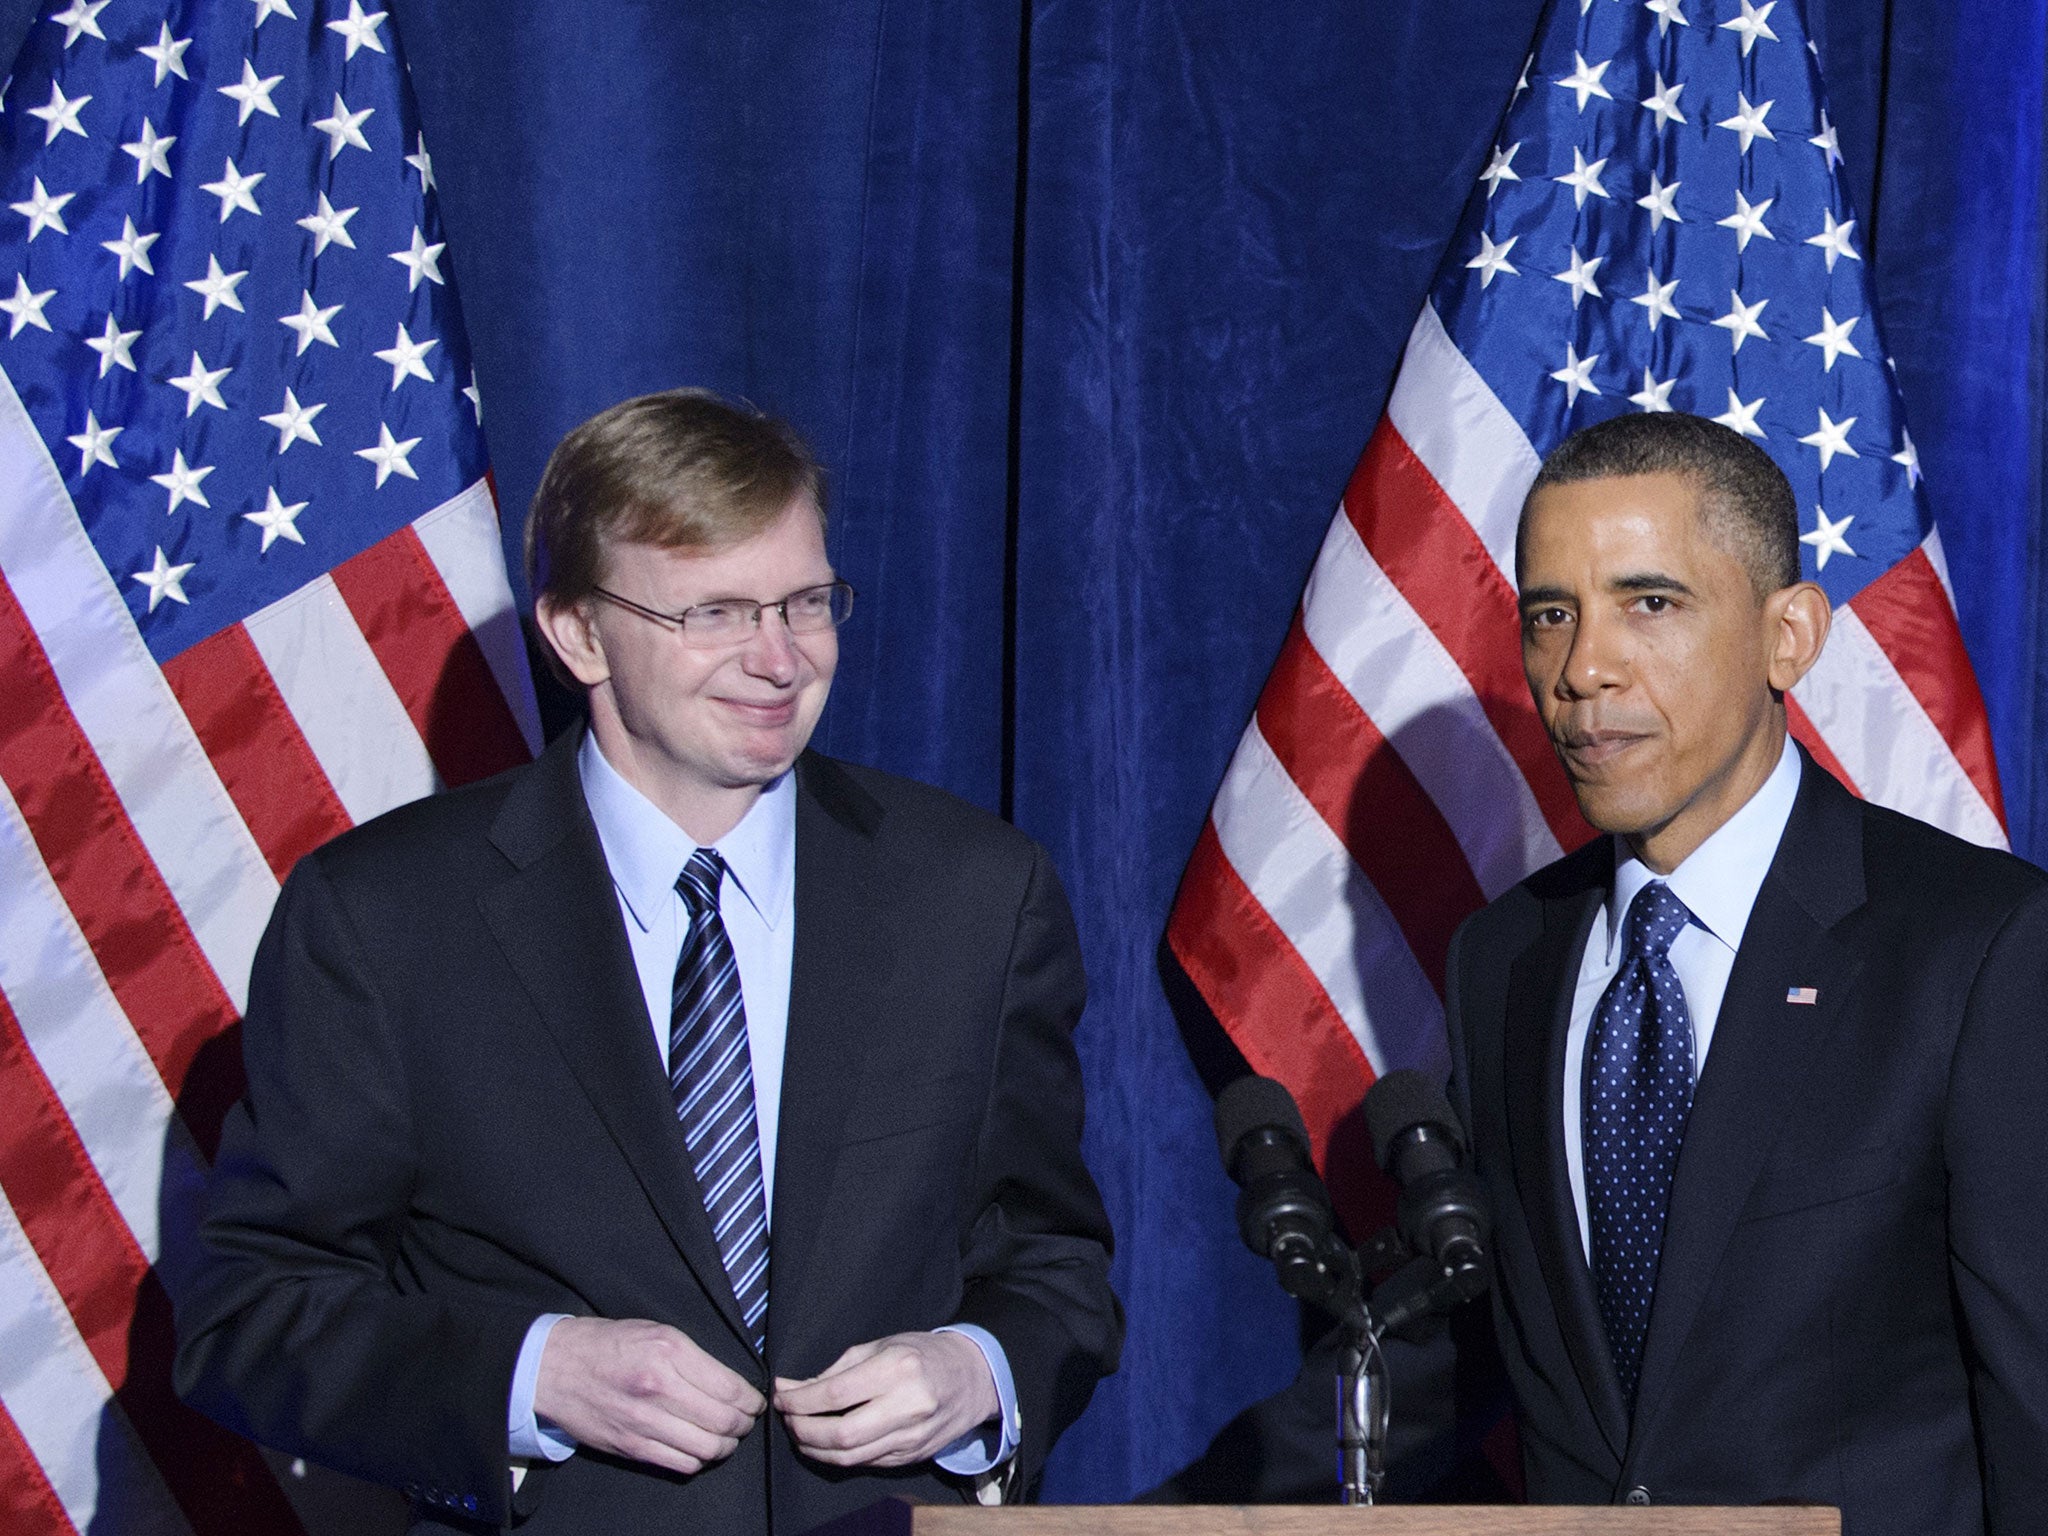 US President Barack Obama speaks as Organizing for Action head Jim Messina (L) looks on during an Organizing for Action dinner on March 13, 2013 at the St. Regis Hotel in Washington, DC. Messina was the manager of Obama's 2012 re-election campaign.